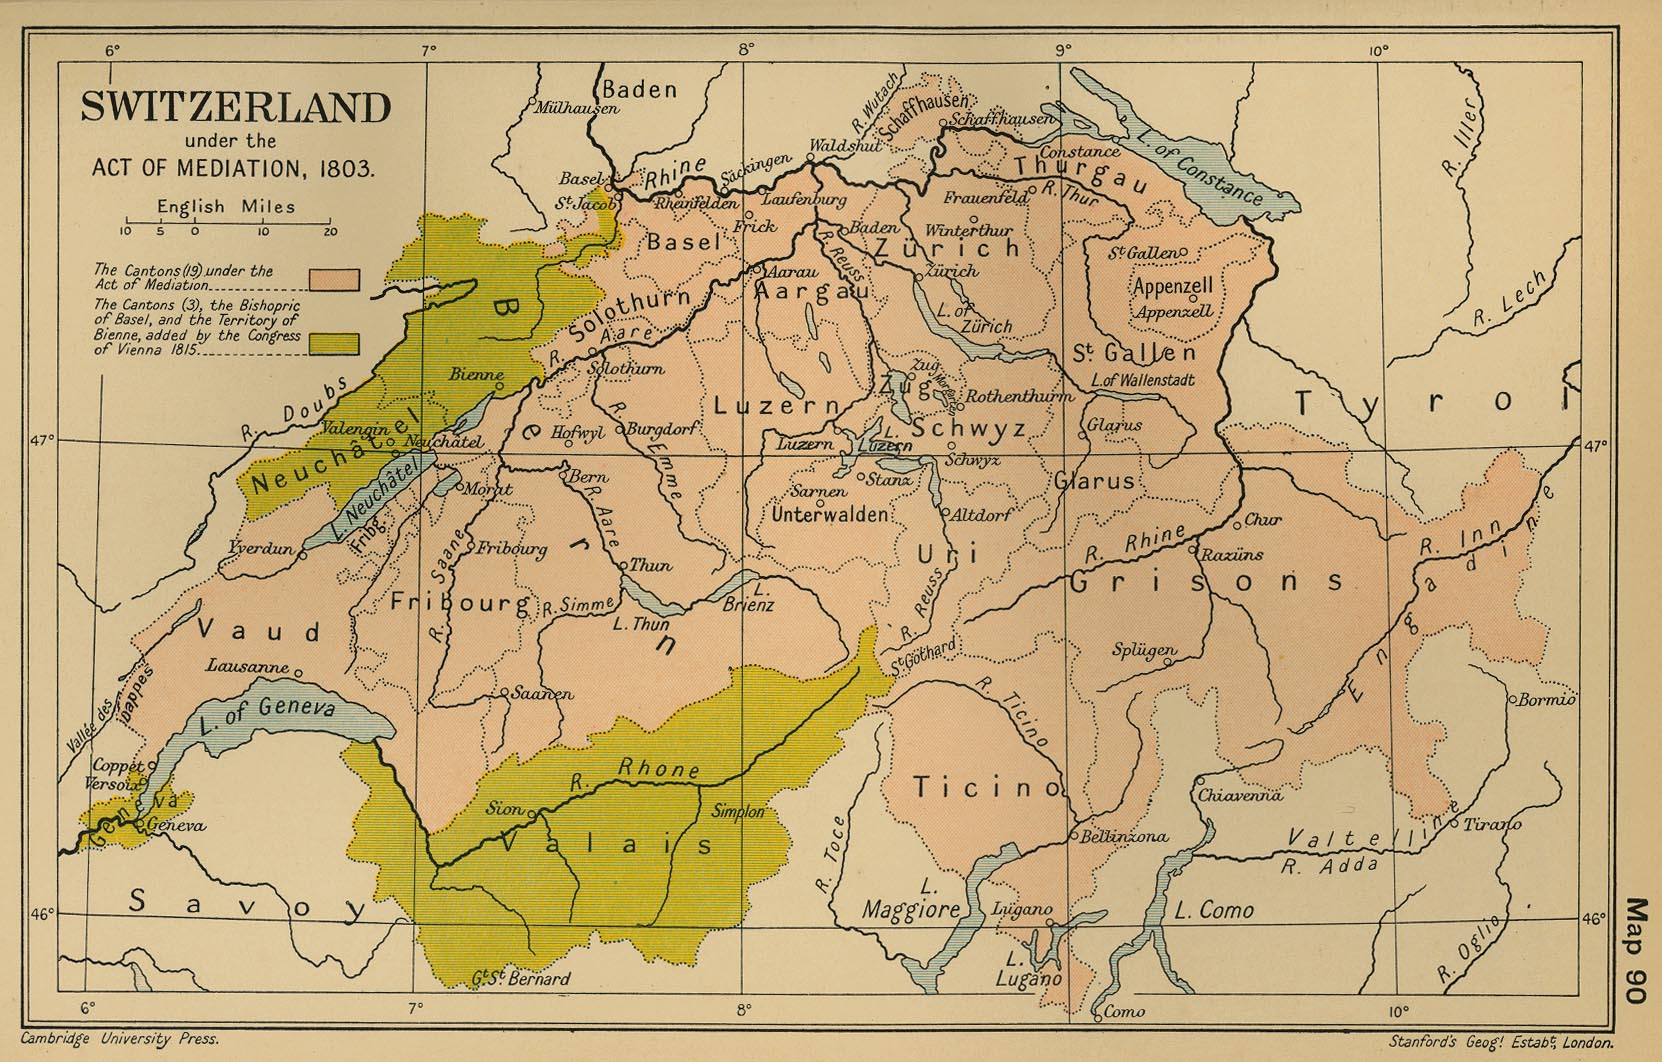 Map of Switzerland 1803: The Act of Mediation